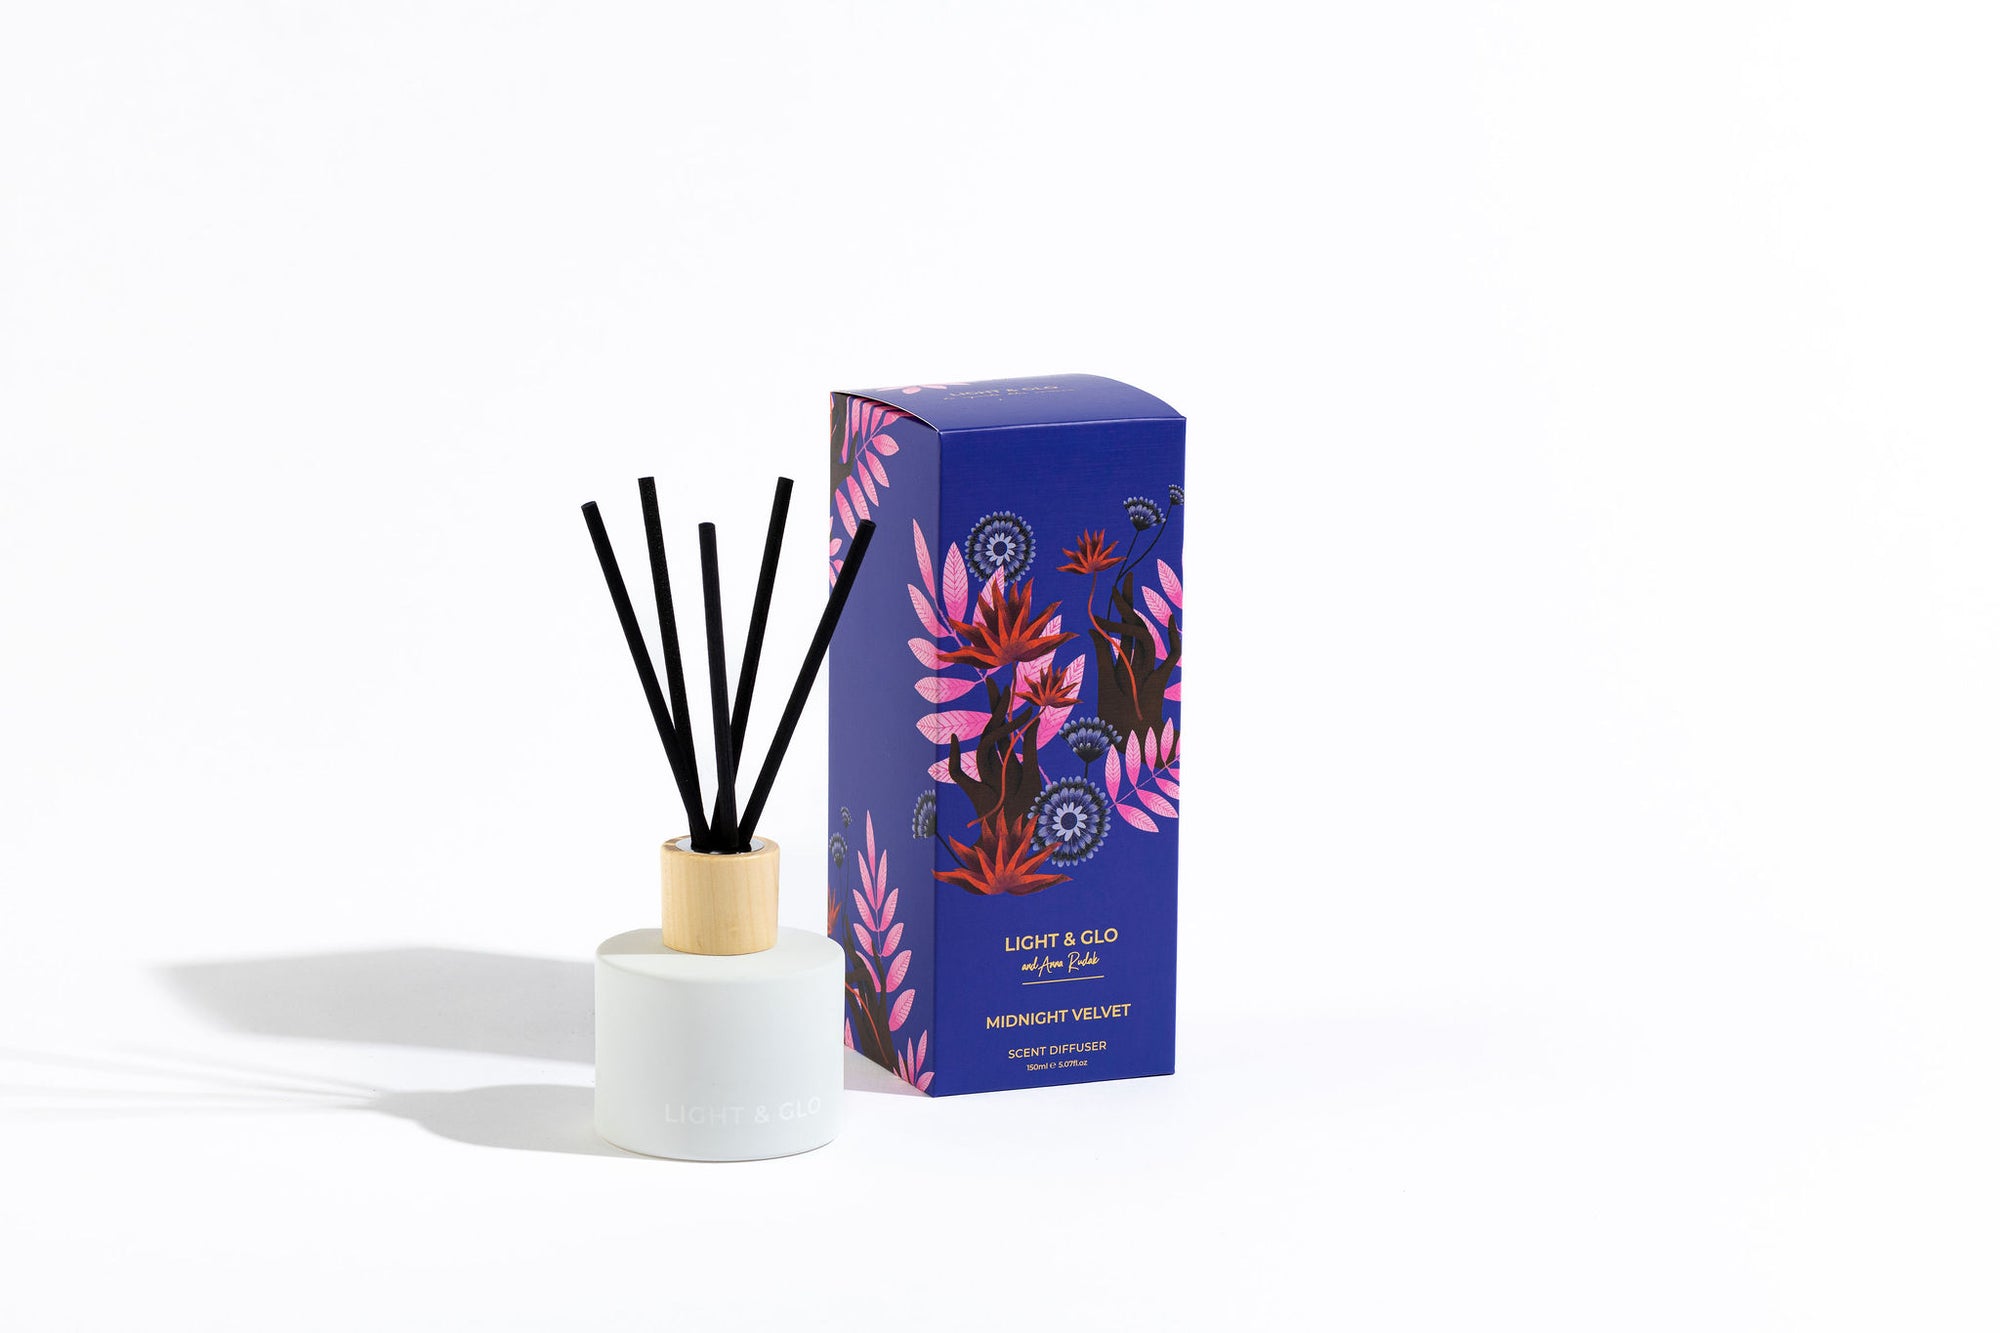 Artist Scent Diffuser - Midnight Velvet | Luxury Candles & Home Fragrances by Light + Glo